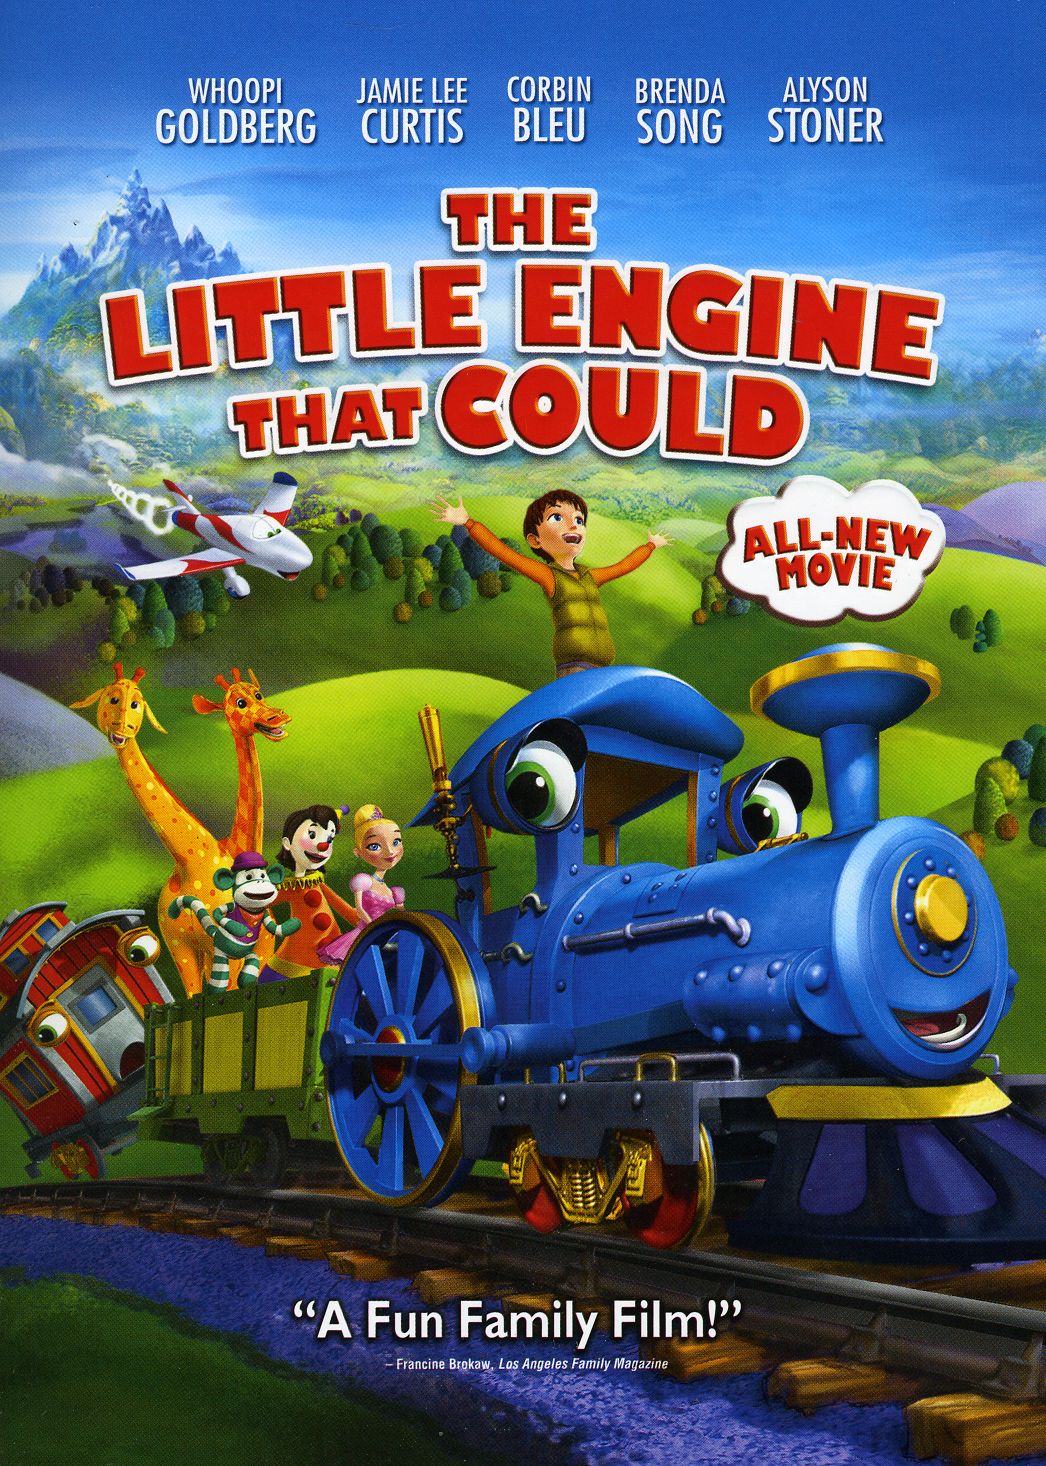 LITTLE ENGINE THAT COULD (2011) / (AC3 DOL SLIP)